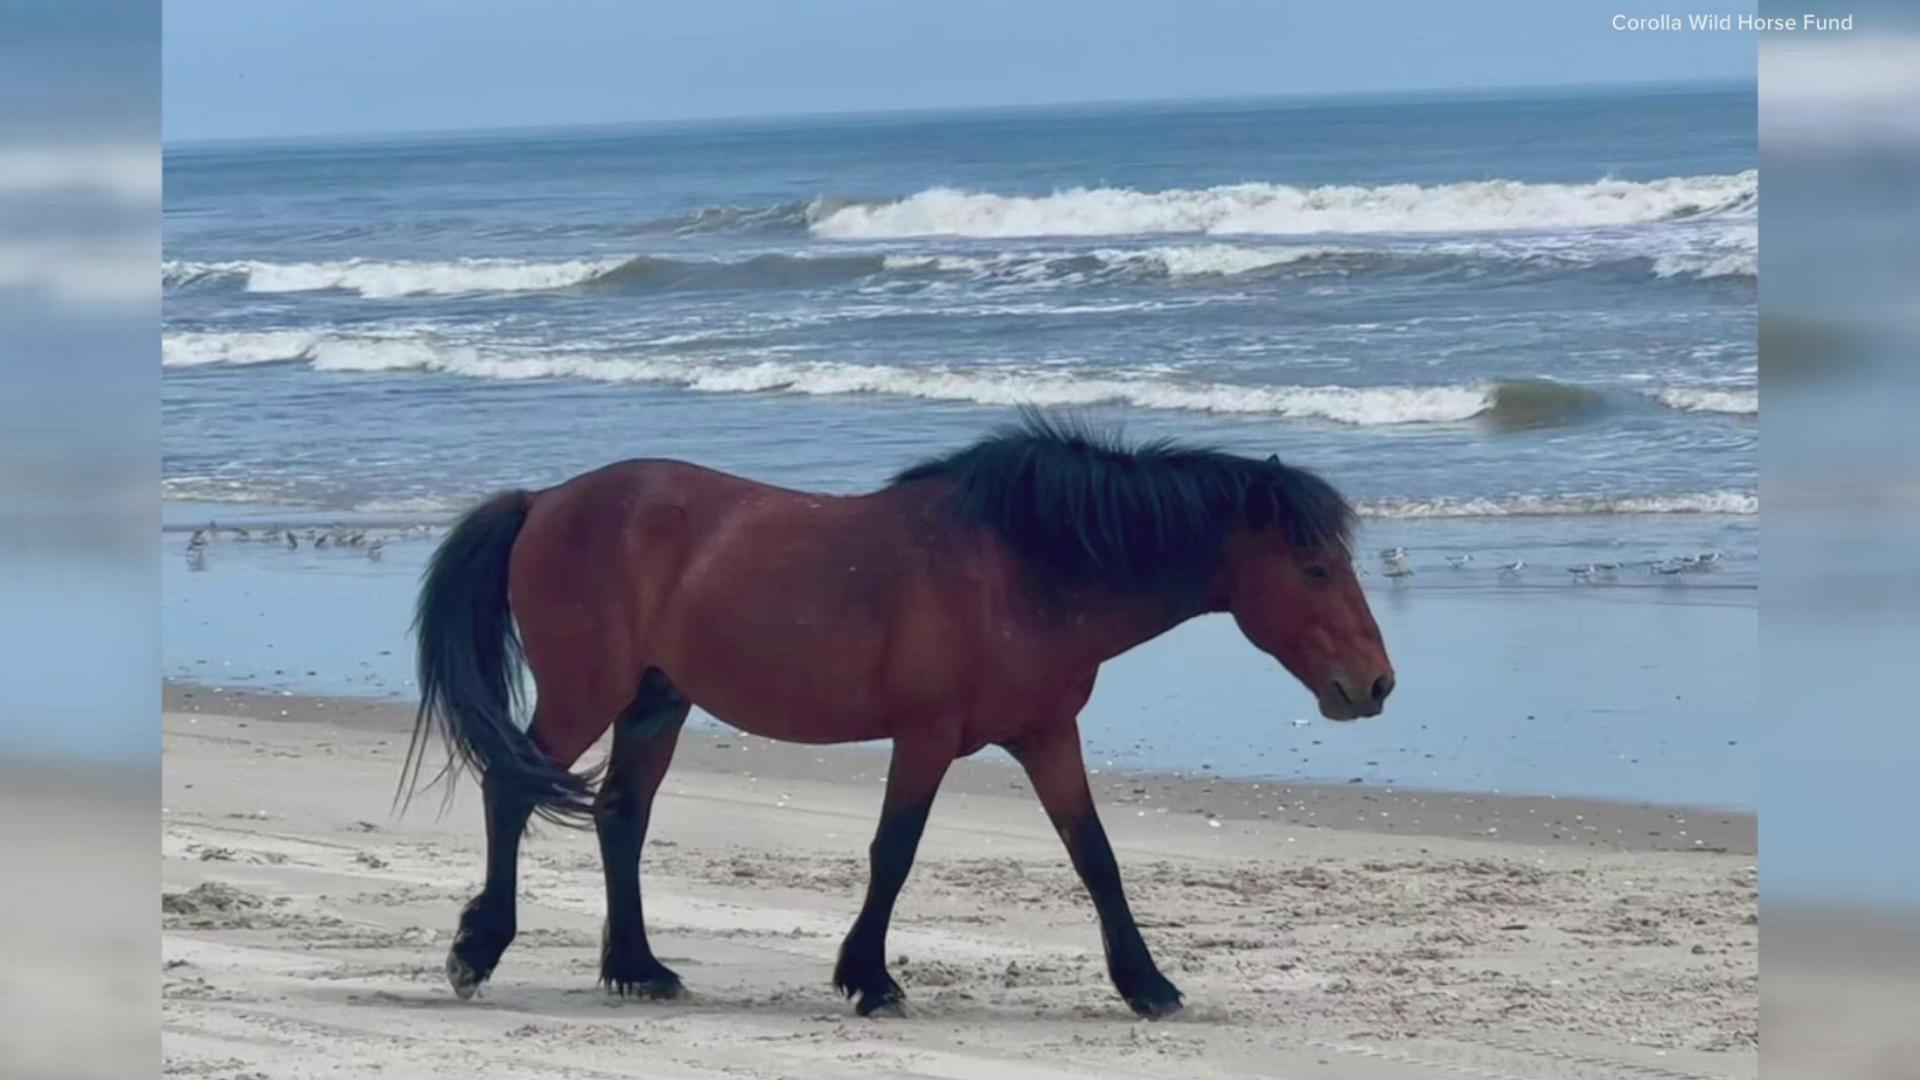 The Outer Banks community is devastated after an endangered wild horse was hit by a vehicle on the beach in Corolla.